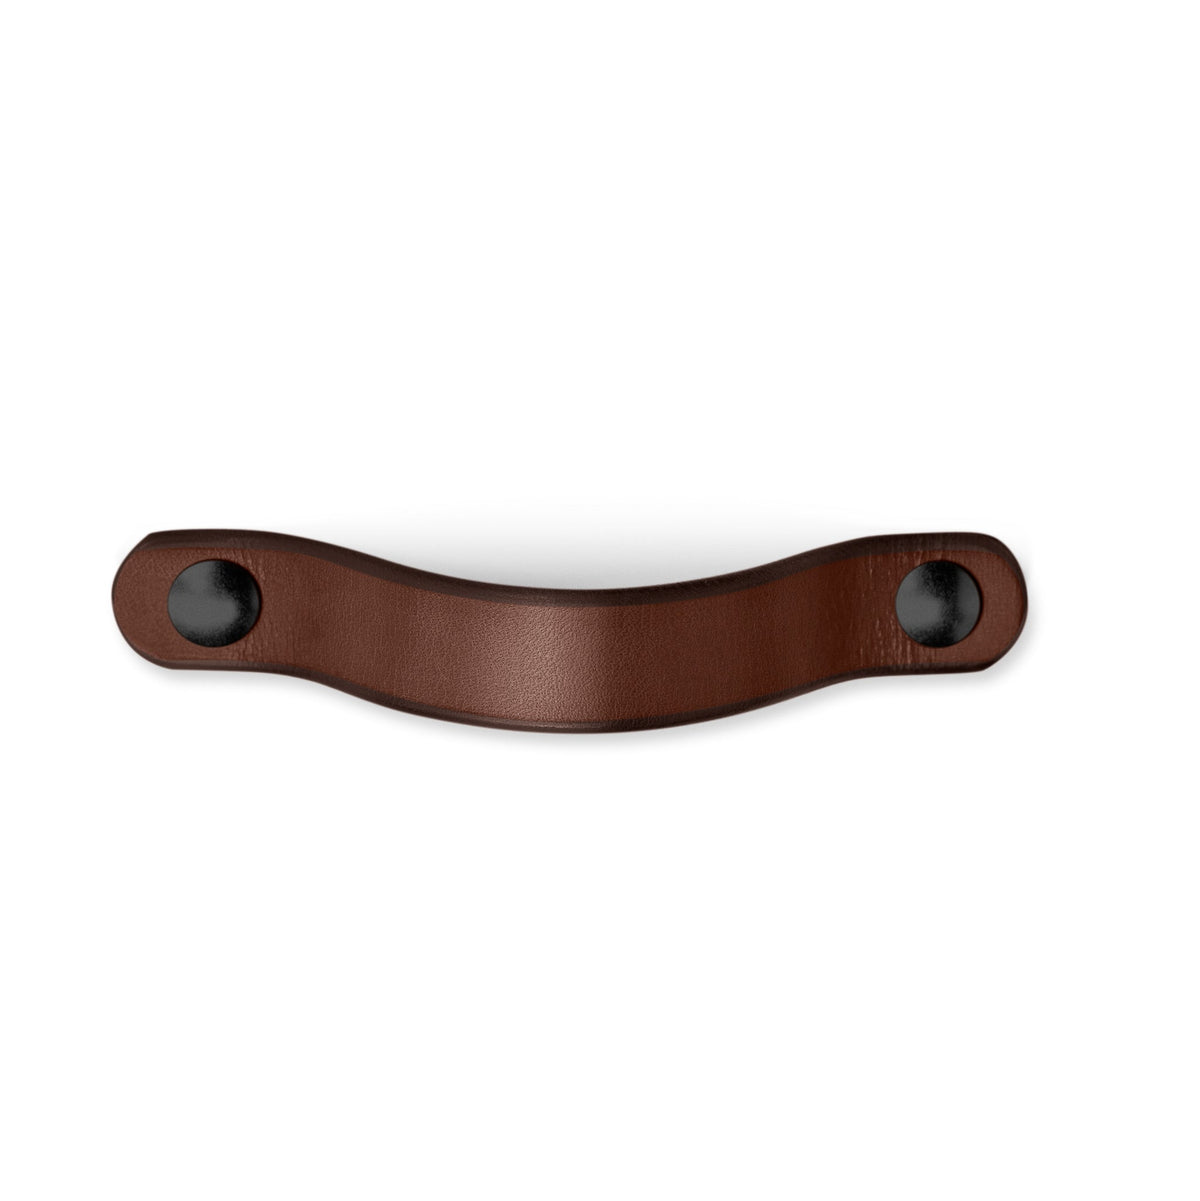 Walnut Studiolo Drawer Pulls Leather Drawer Pull - The Flanders - Dark Brown Leather with Black Hardware